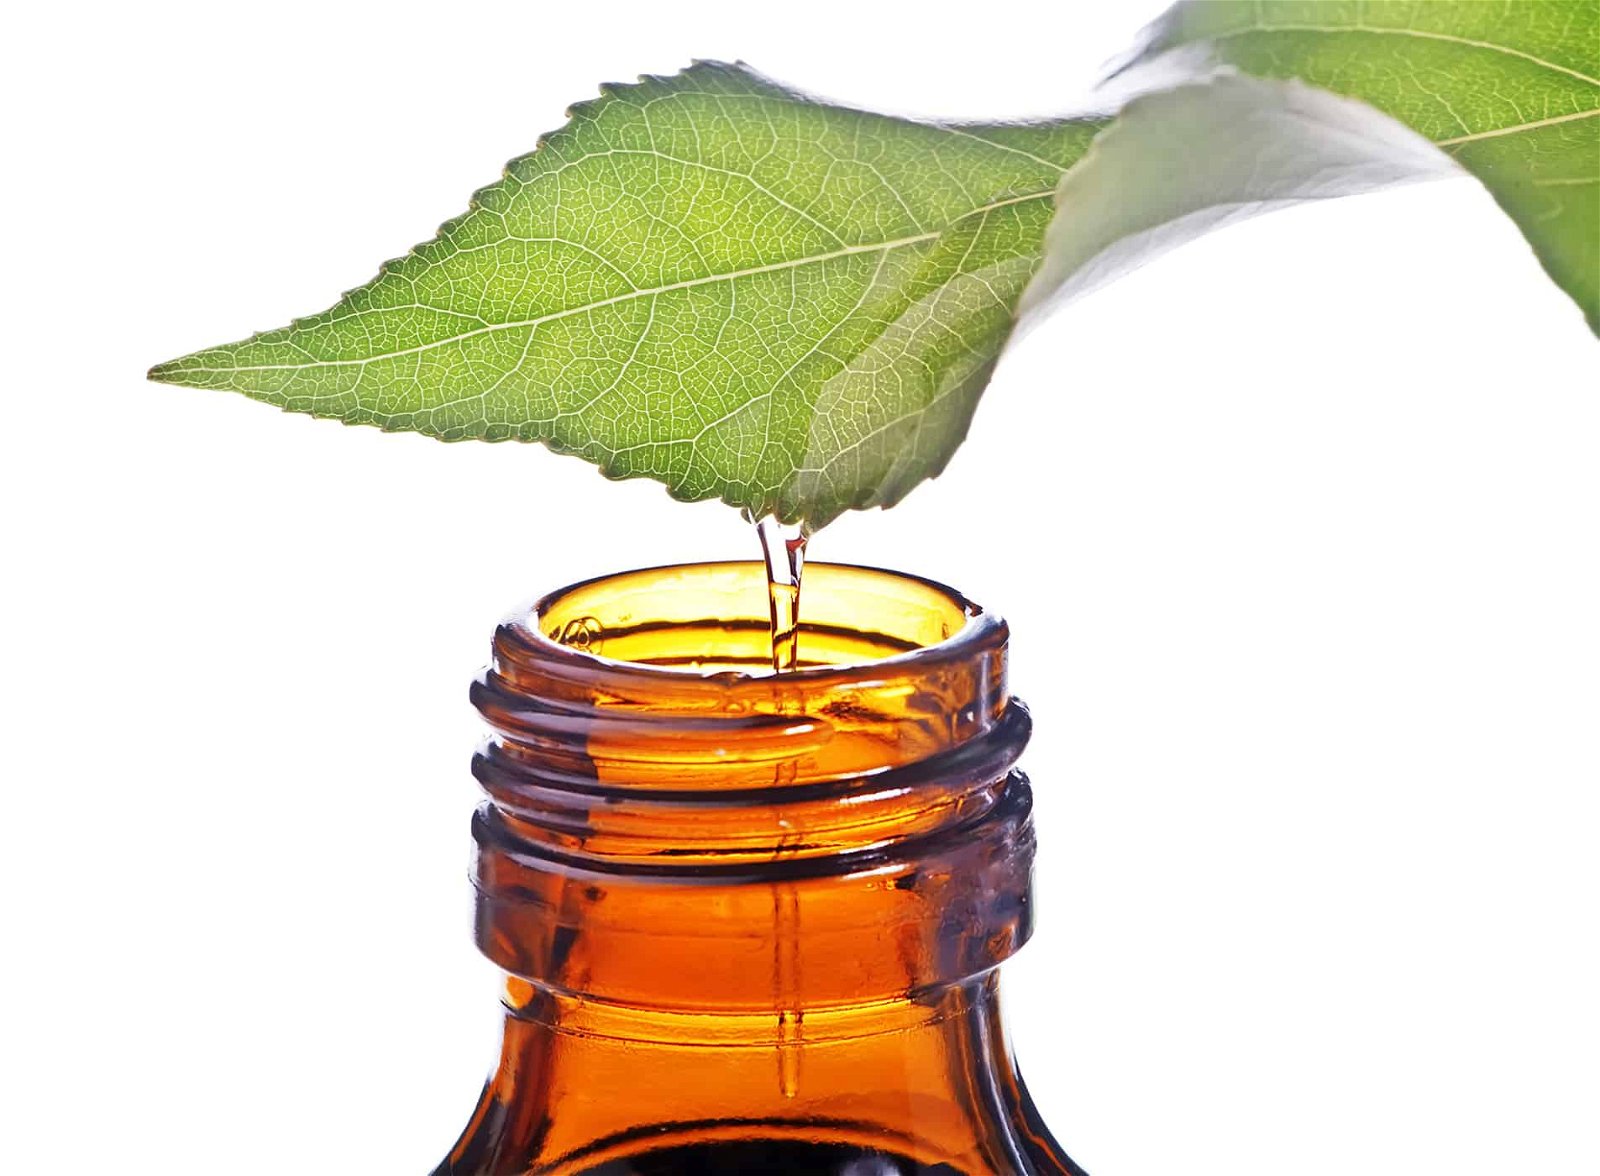 QuintEssential Oils - Essential oils are a great natural way to